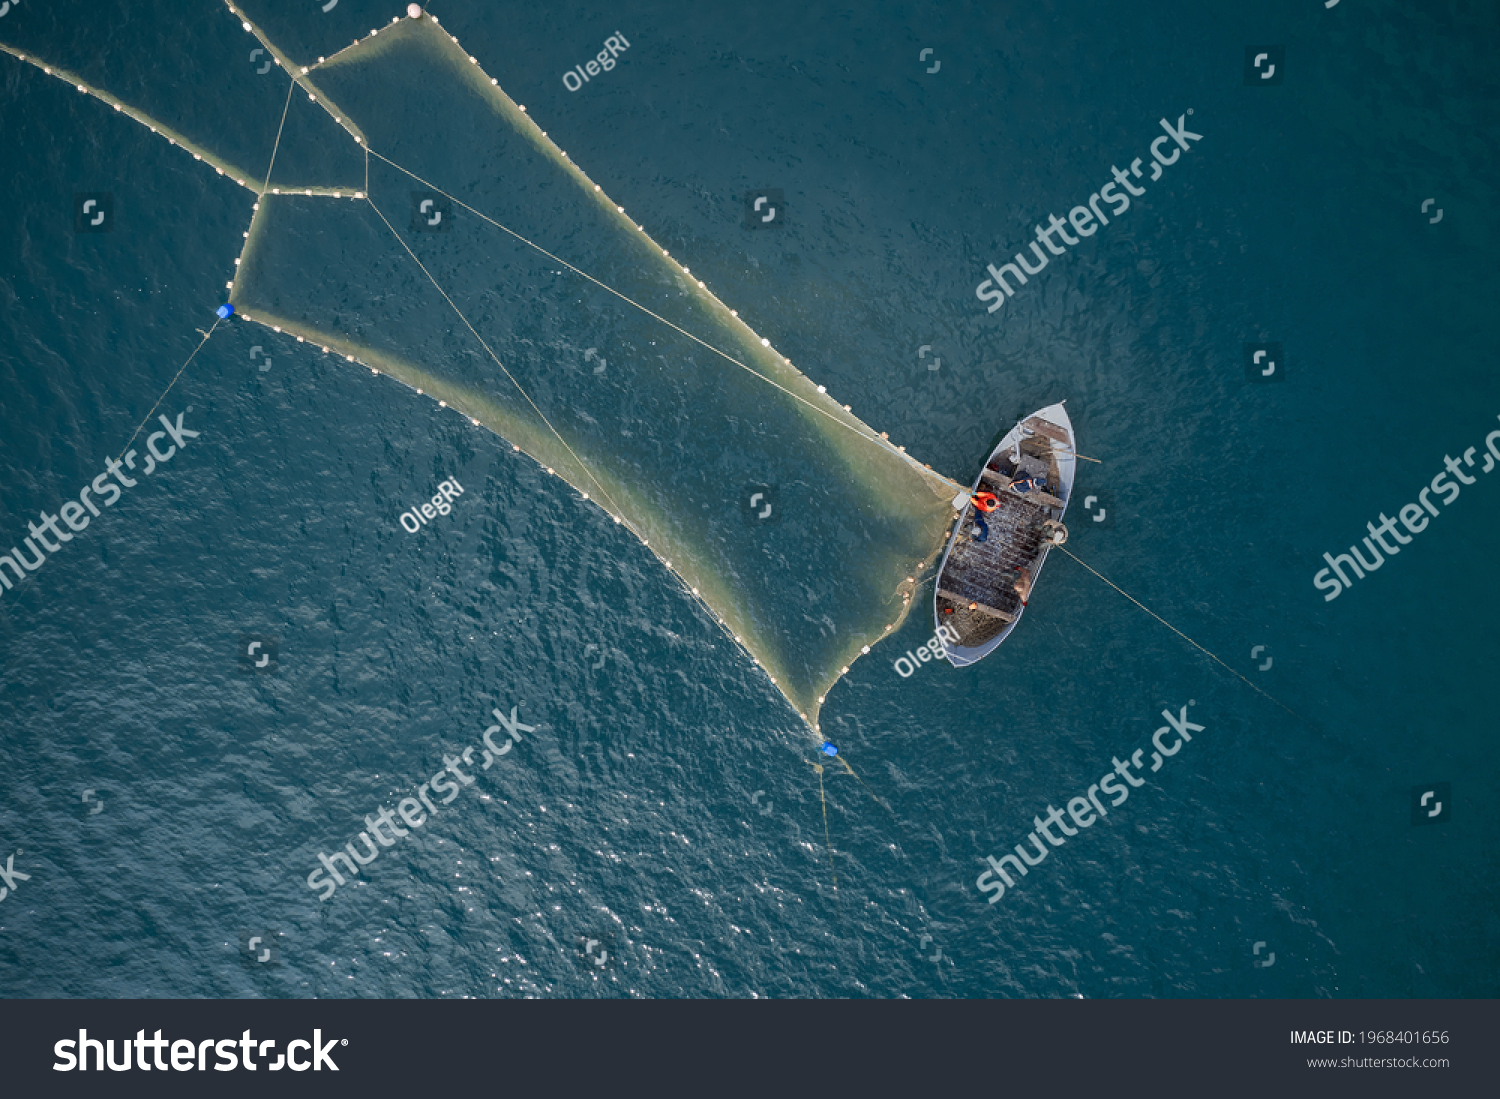 Vintage wooden boat in coral sea. Boat drone photo. A fisherman on a fishing boat is casting a net for catching fish. #1968401656